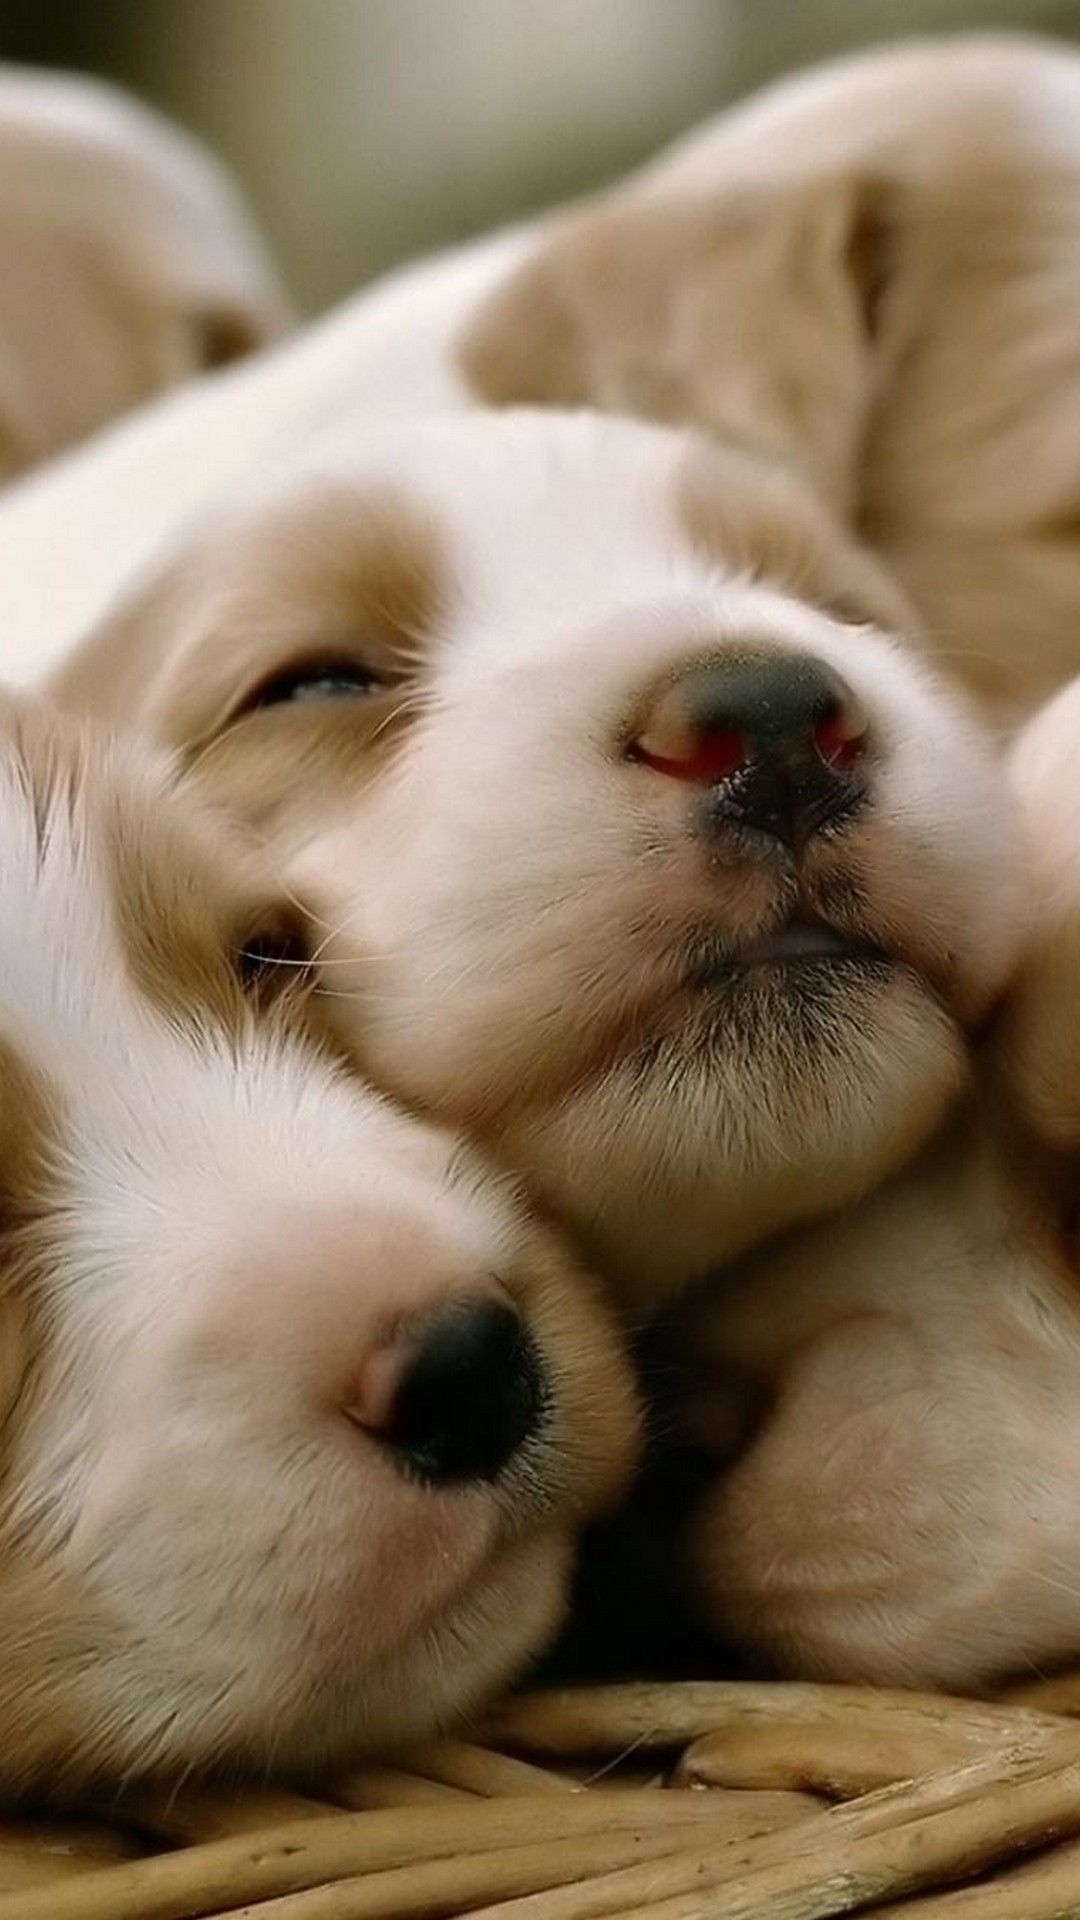 Pics Of Puppies Wallpaper For iPhone with HD Resolution 1080X1920